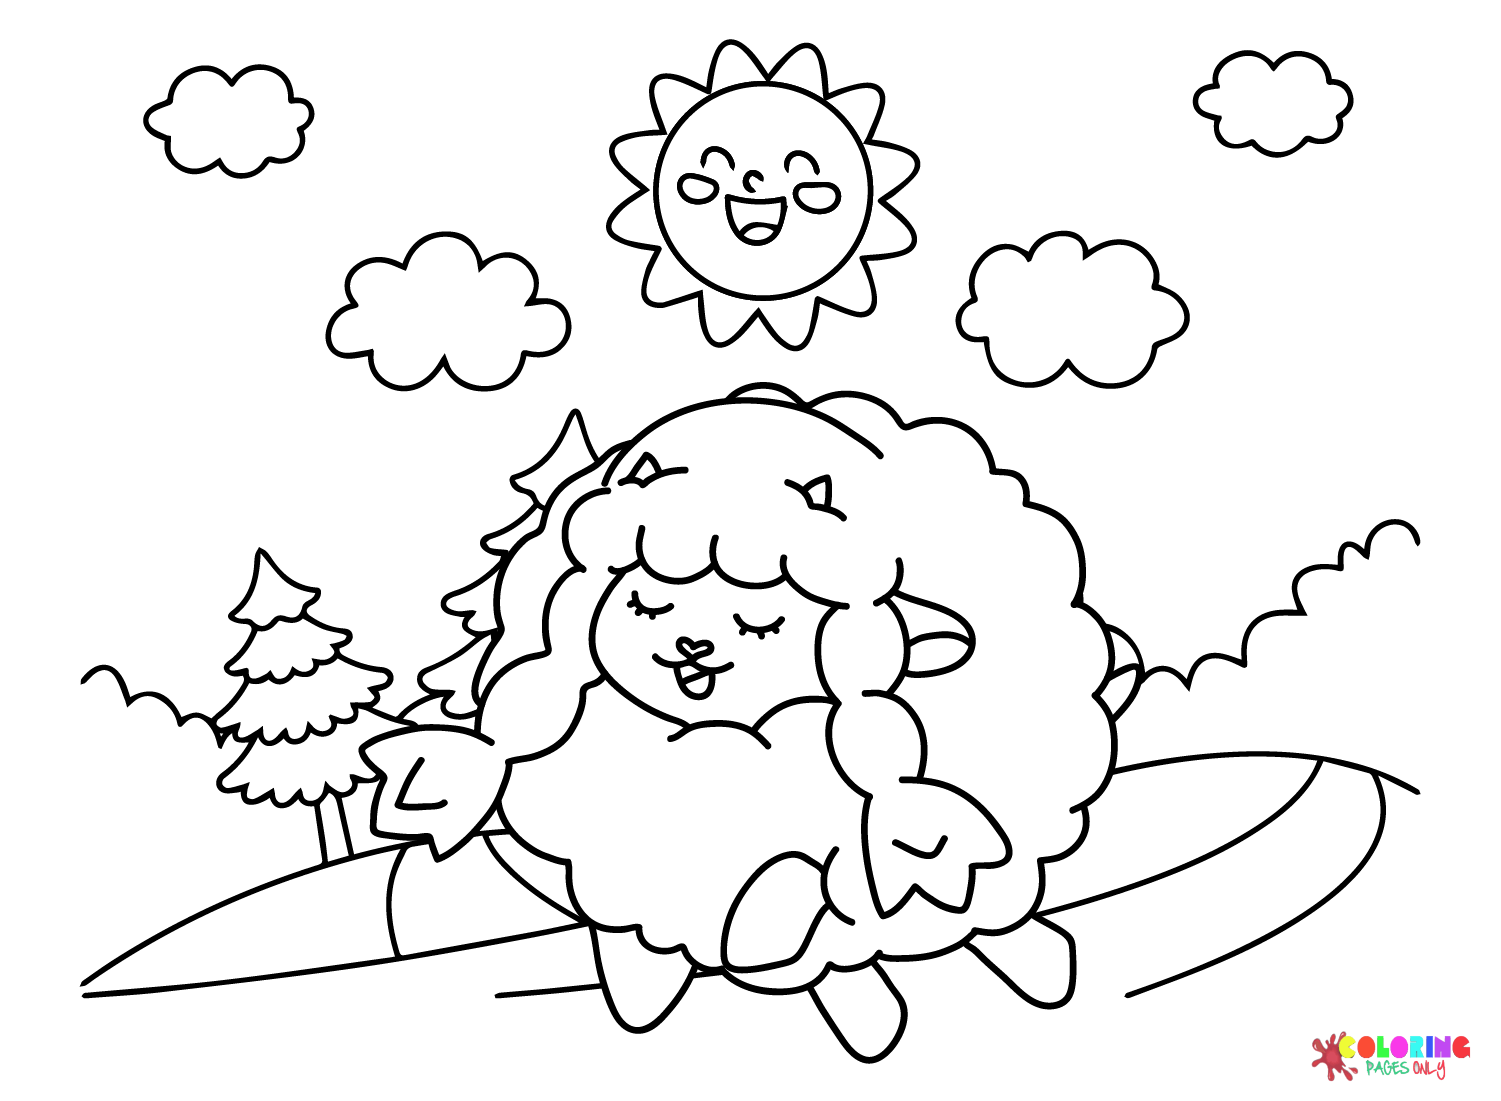 Wooloo Blissful from Wooloo